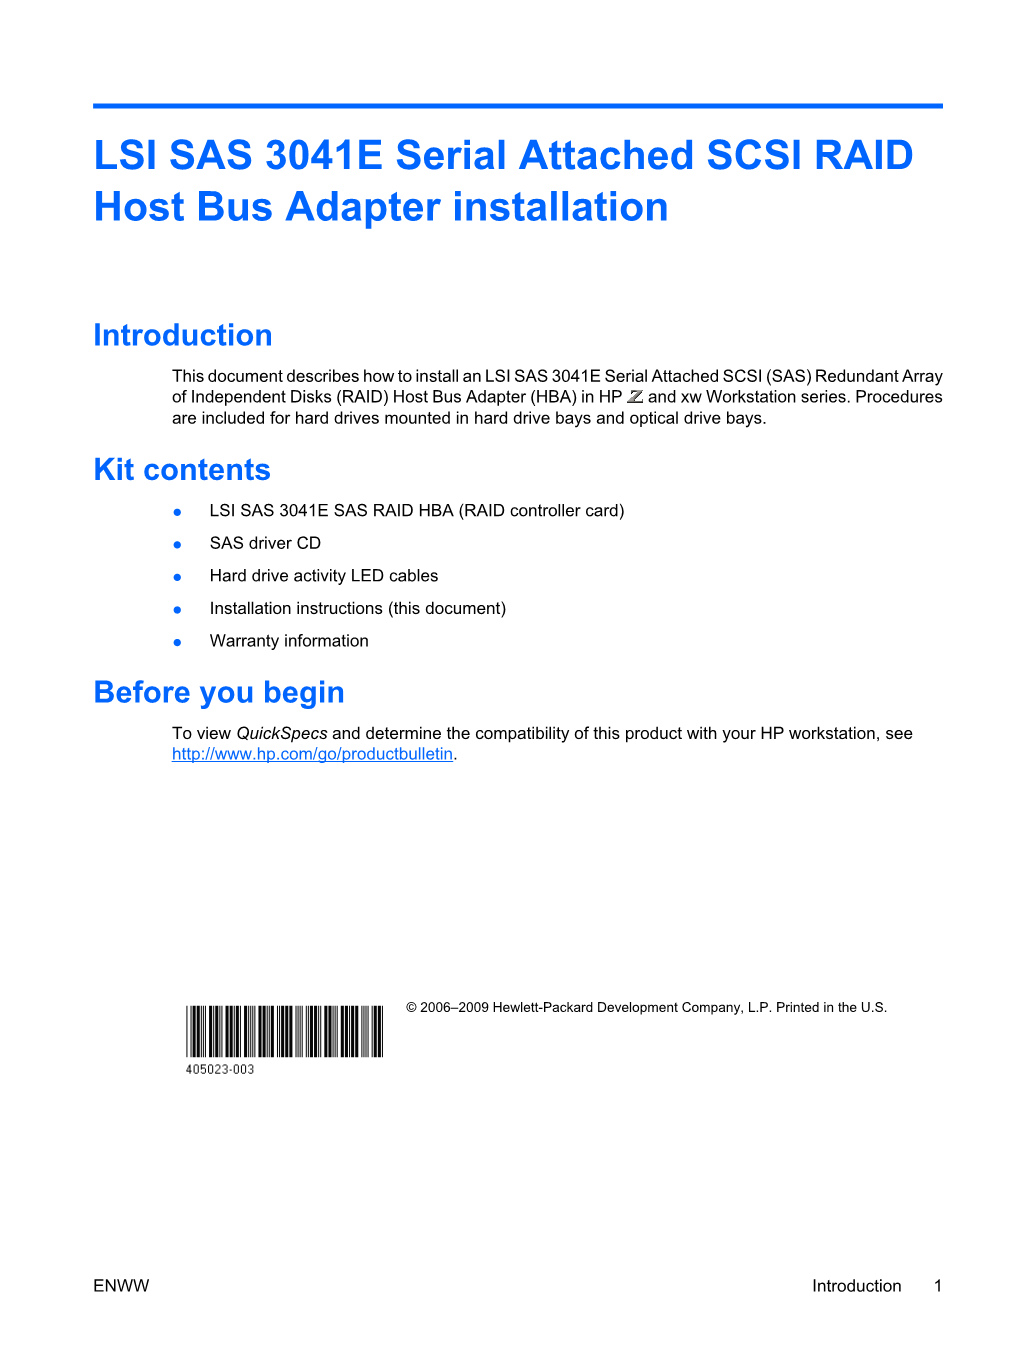 LSI SAS 3041E Serial Attached SCSI RAID Host Bus Adapter Installation